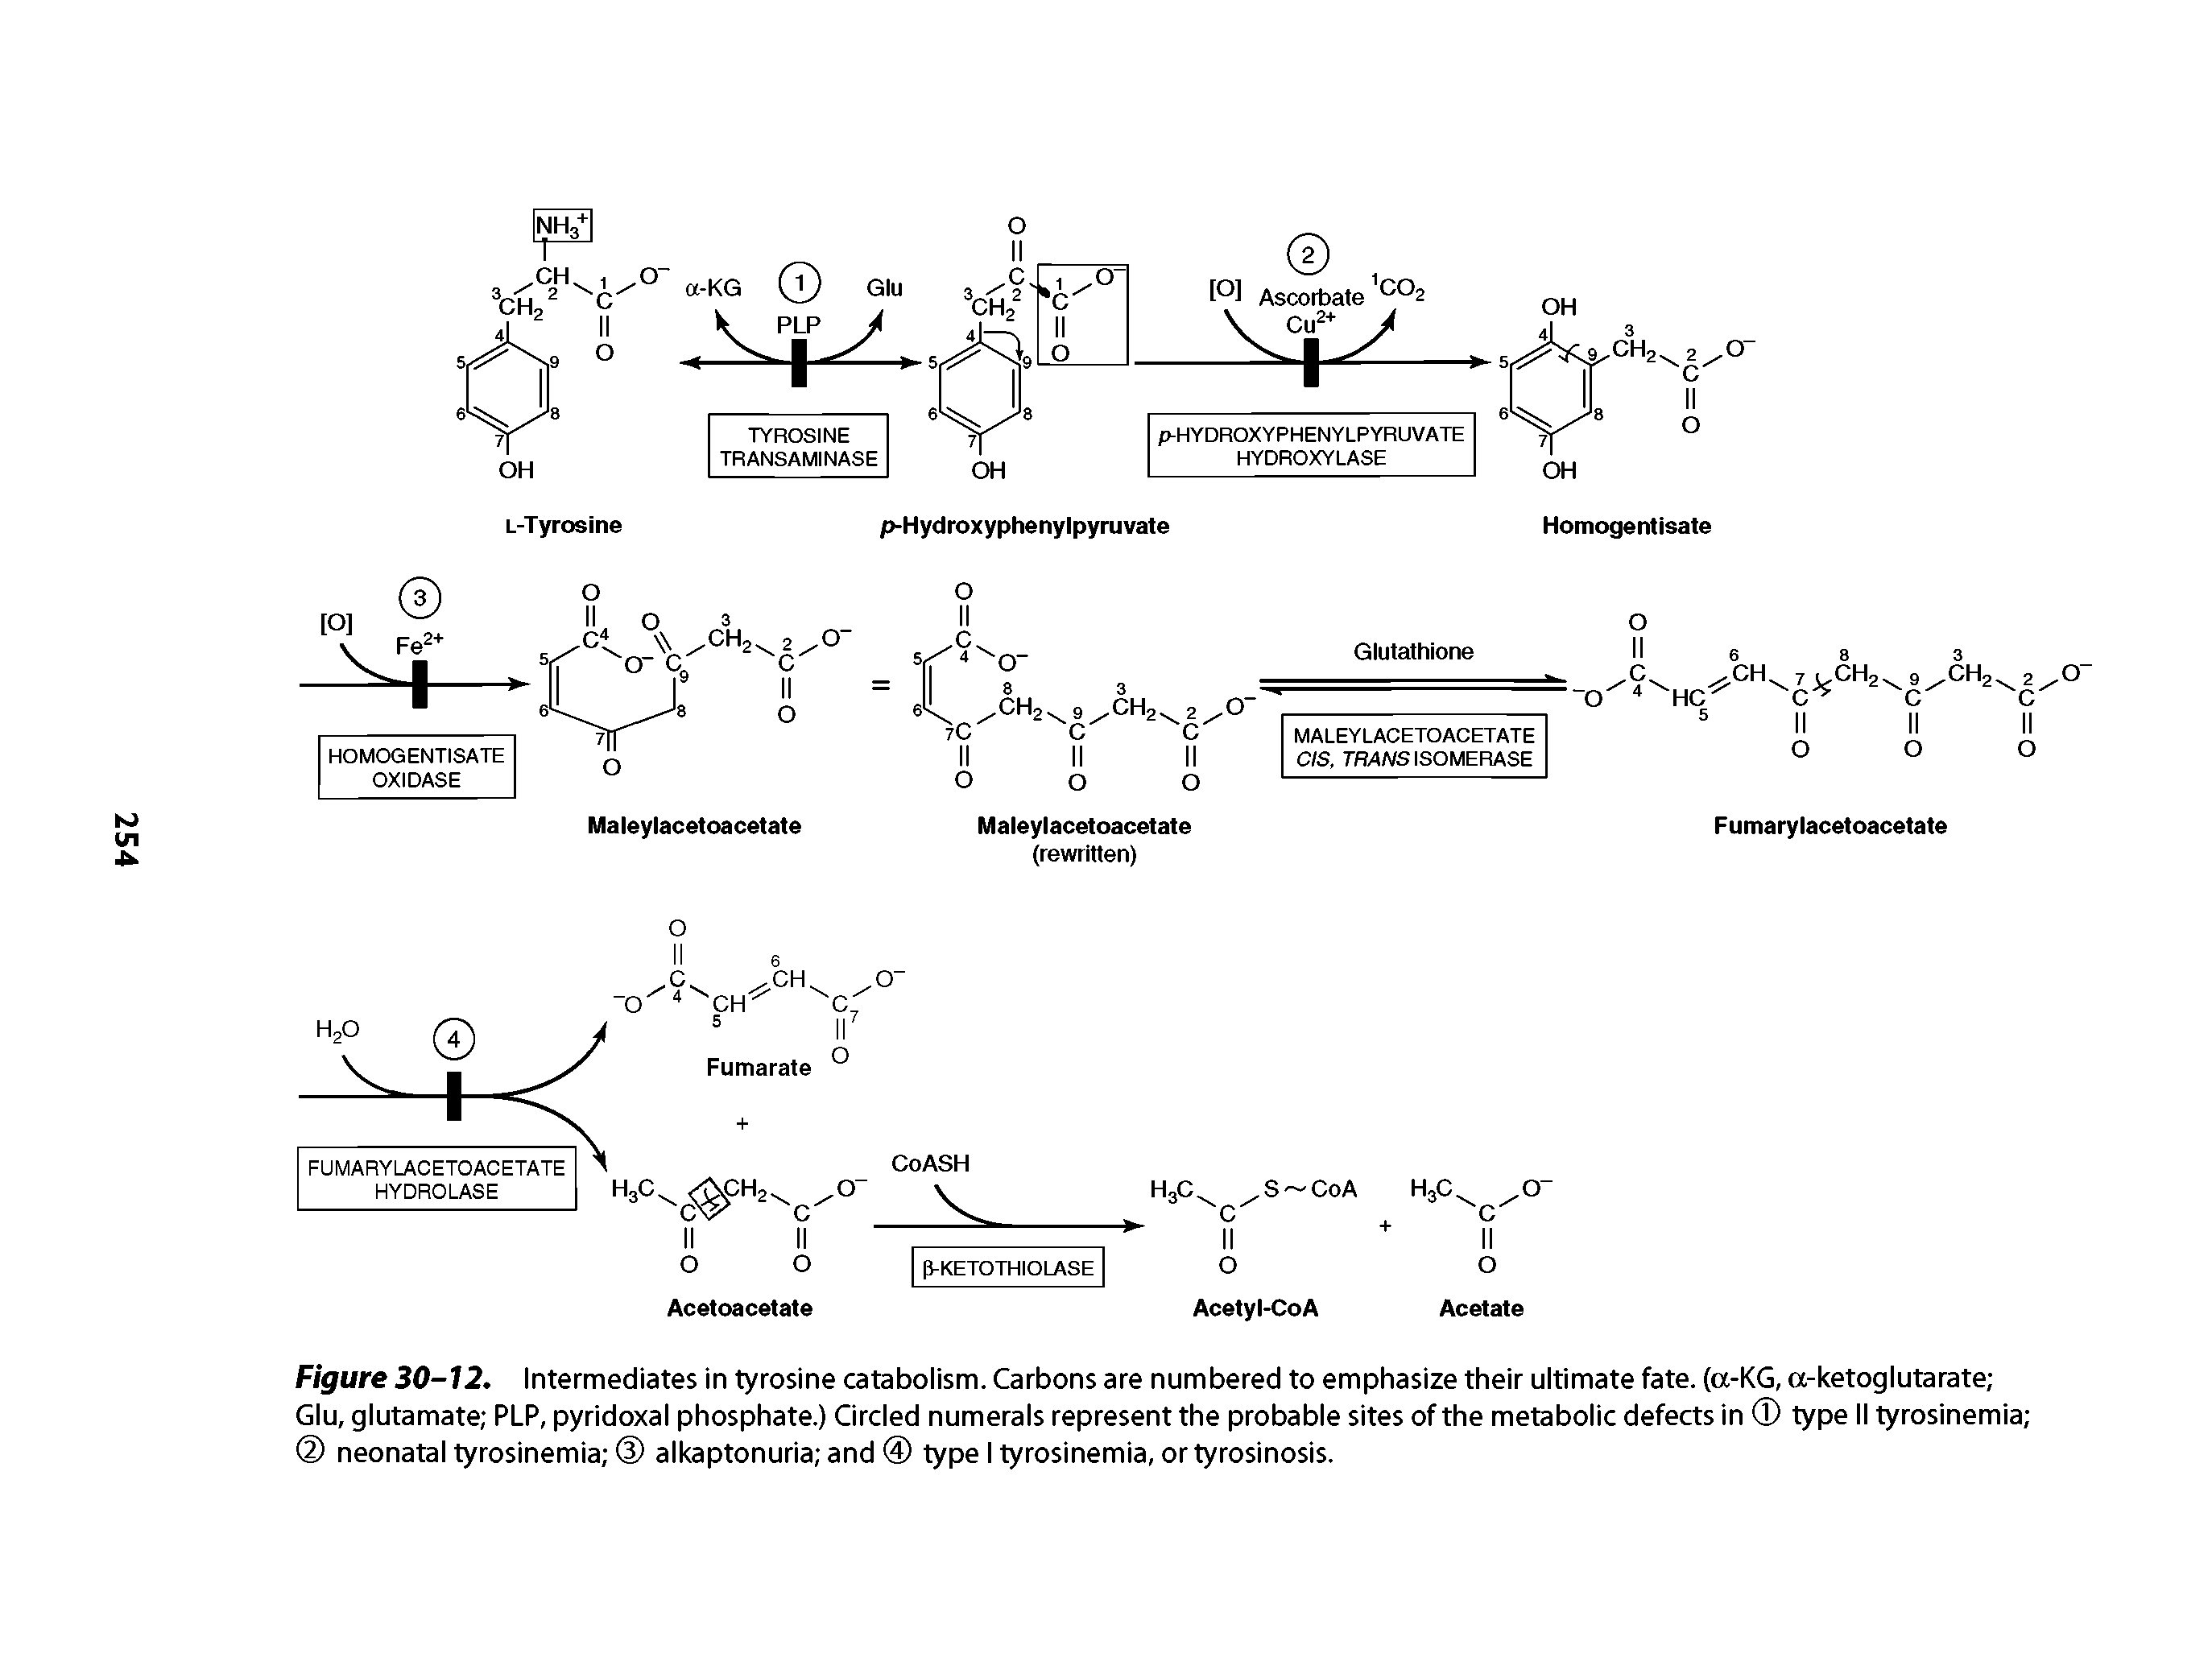 Figure 30-12. Intermediates in tyrosine catabolism. Carbons are numbered to emphasize their ultimate fate. (a-KG, a-ketoglutarate Glu, glutamate PLP, pyridoxal phosphate.) Circled numerals represent the probable sites of the metabolic defects in type II tyrosinemia neonatal tyrosinemia alkaptonuria and 0 type I tyrosinemia, or tyrosinosis.